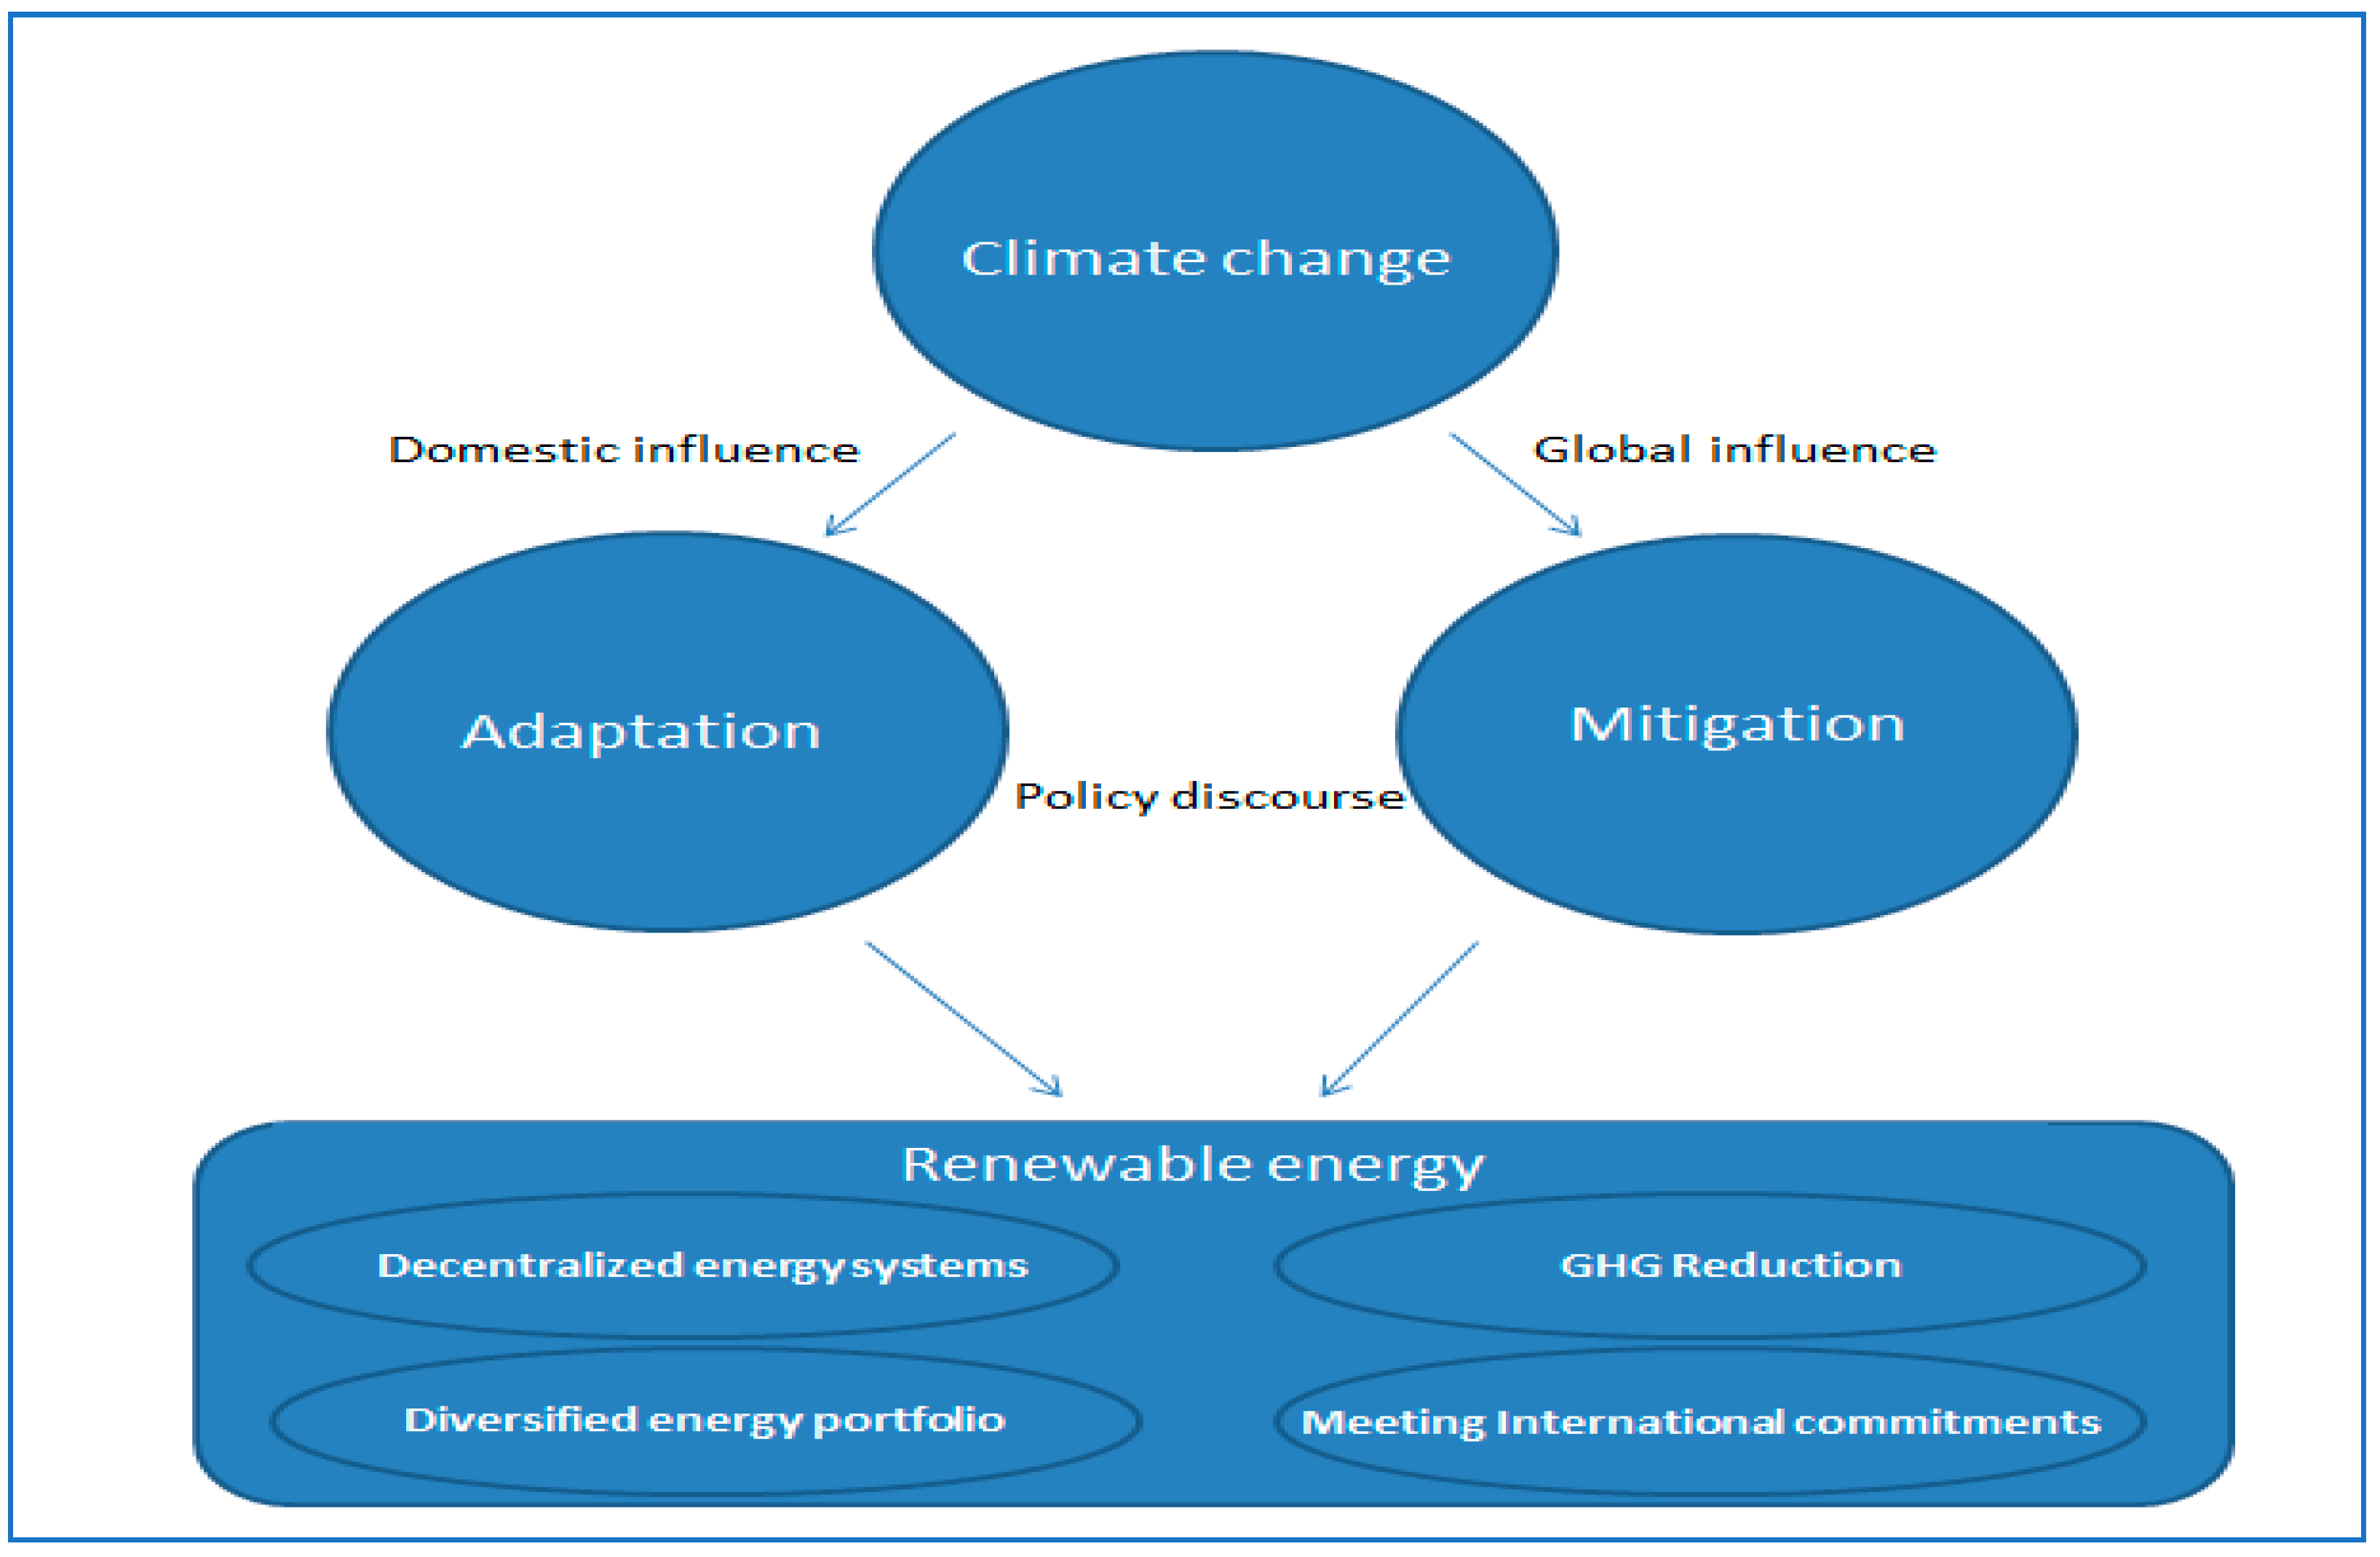 III. The Role of Renewable Energy Sources in Reducing Greenhouse Gas Emissions